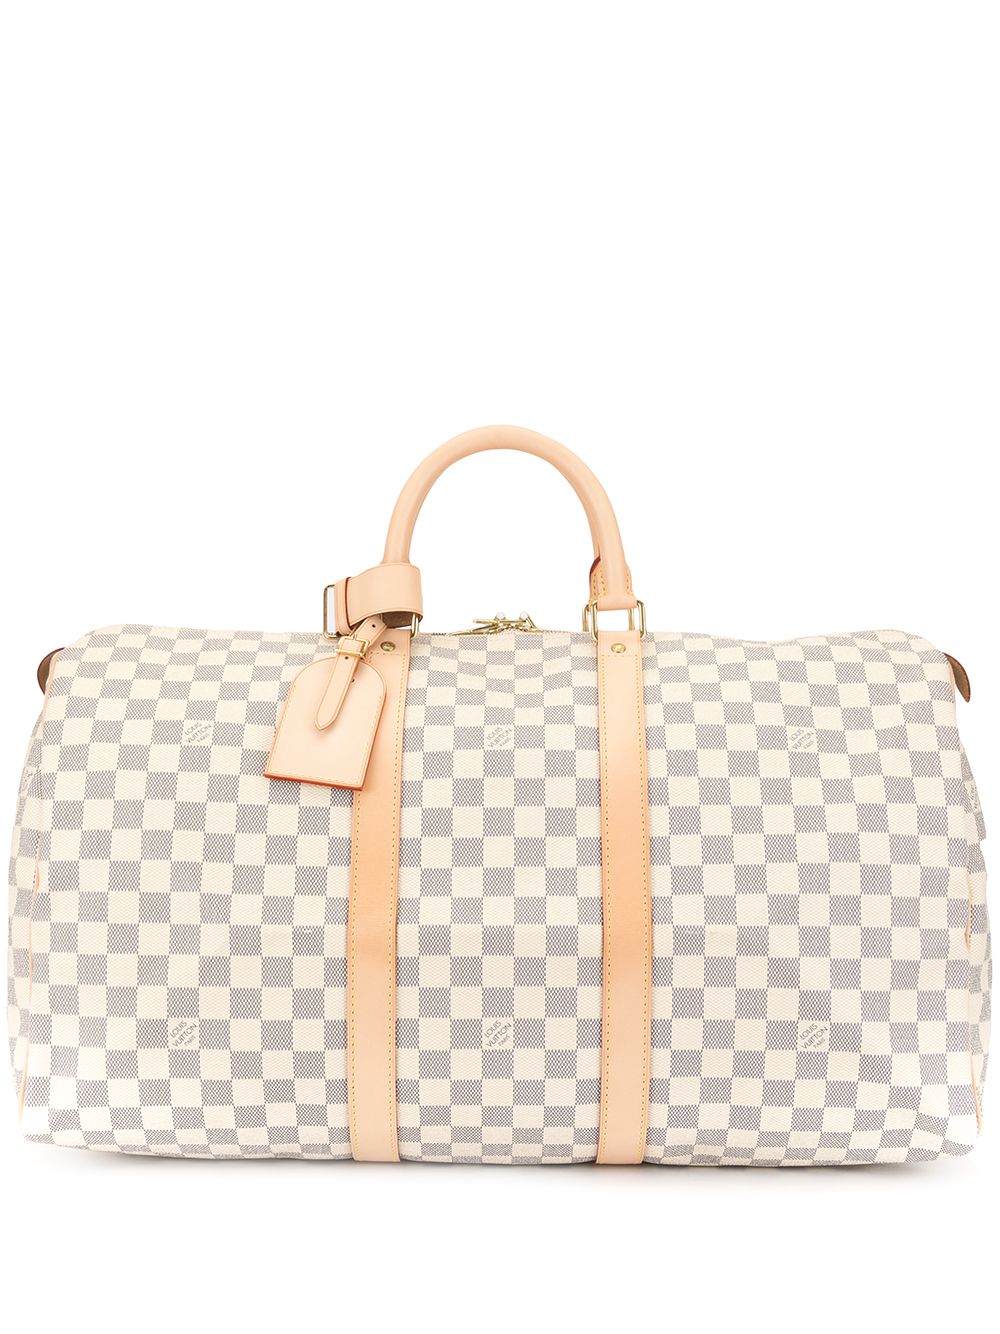 Pre-Owned Louis Vuitton Keepall 50 Travel Bag In White | ModeSens